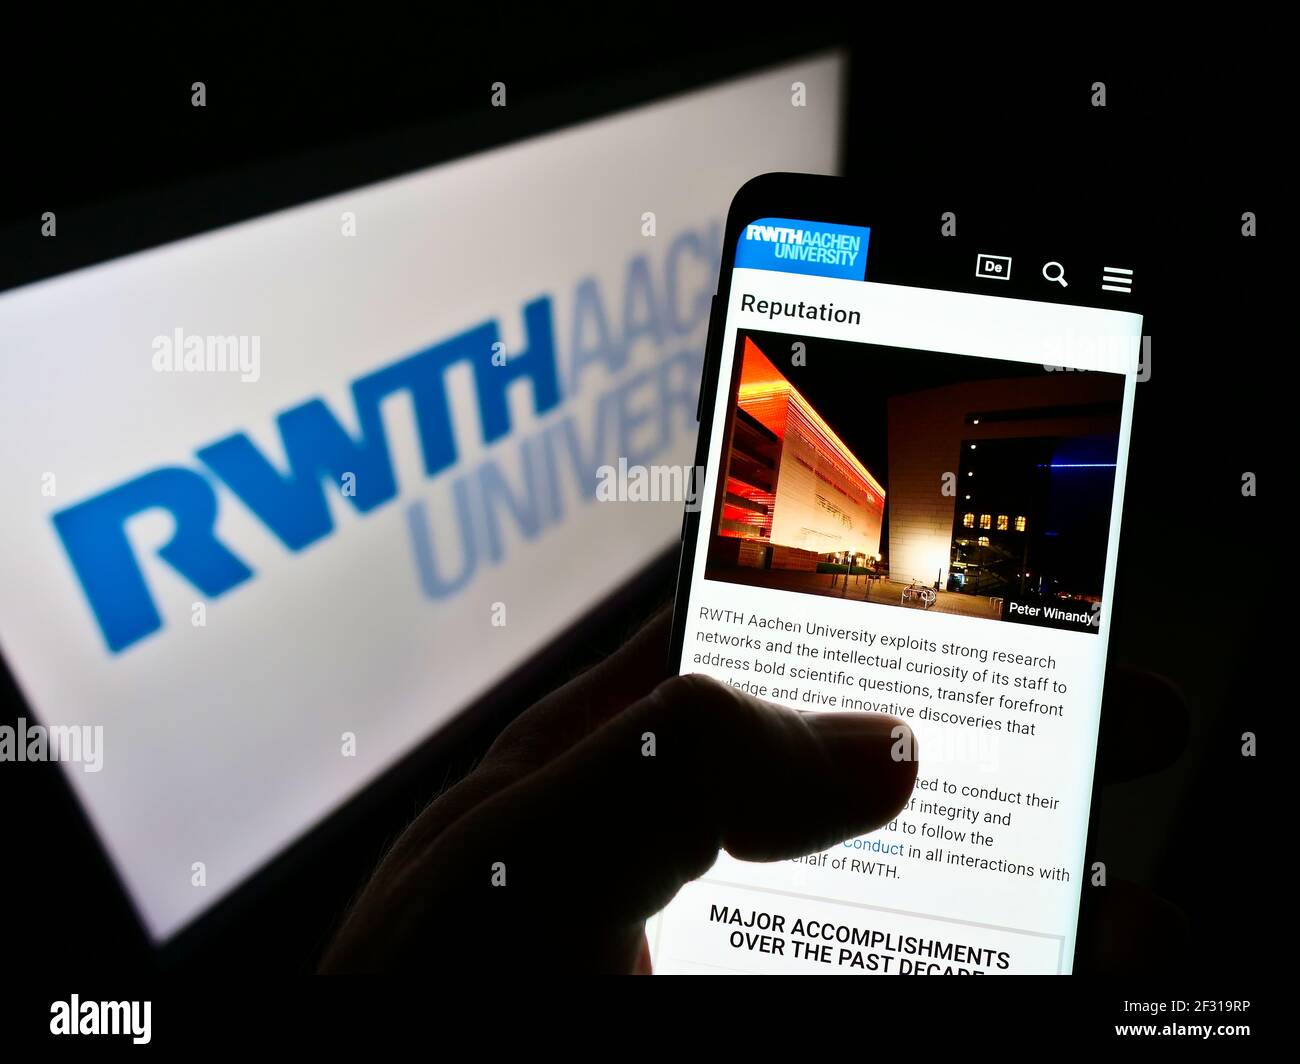 Person holding mobile phone with logo of German education institution RWTH Aachen University on screen in front of web page. Focus on phone display. Stock Photo